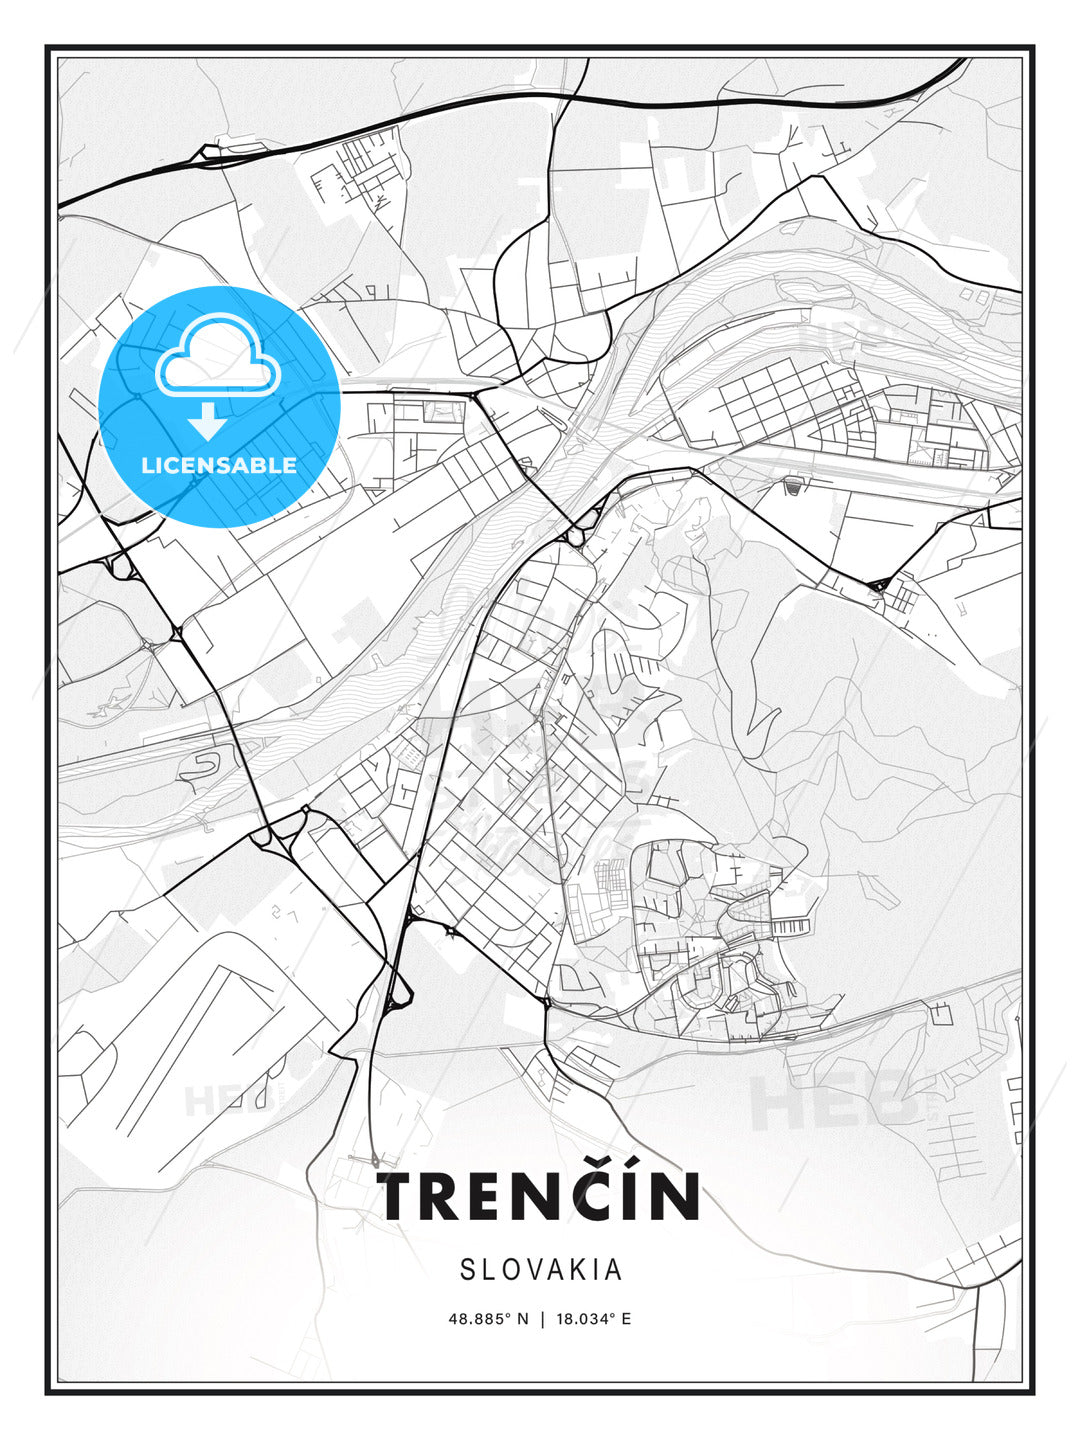 Trenčín, Slovakia, Modern Print Template in Various Formats - HEBSTREITS Sketches